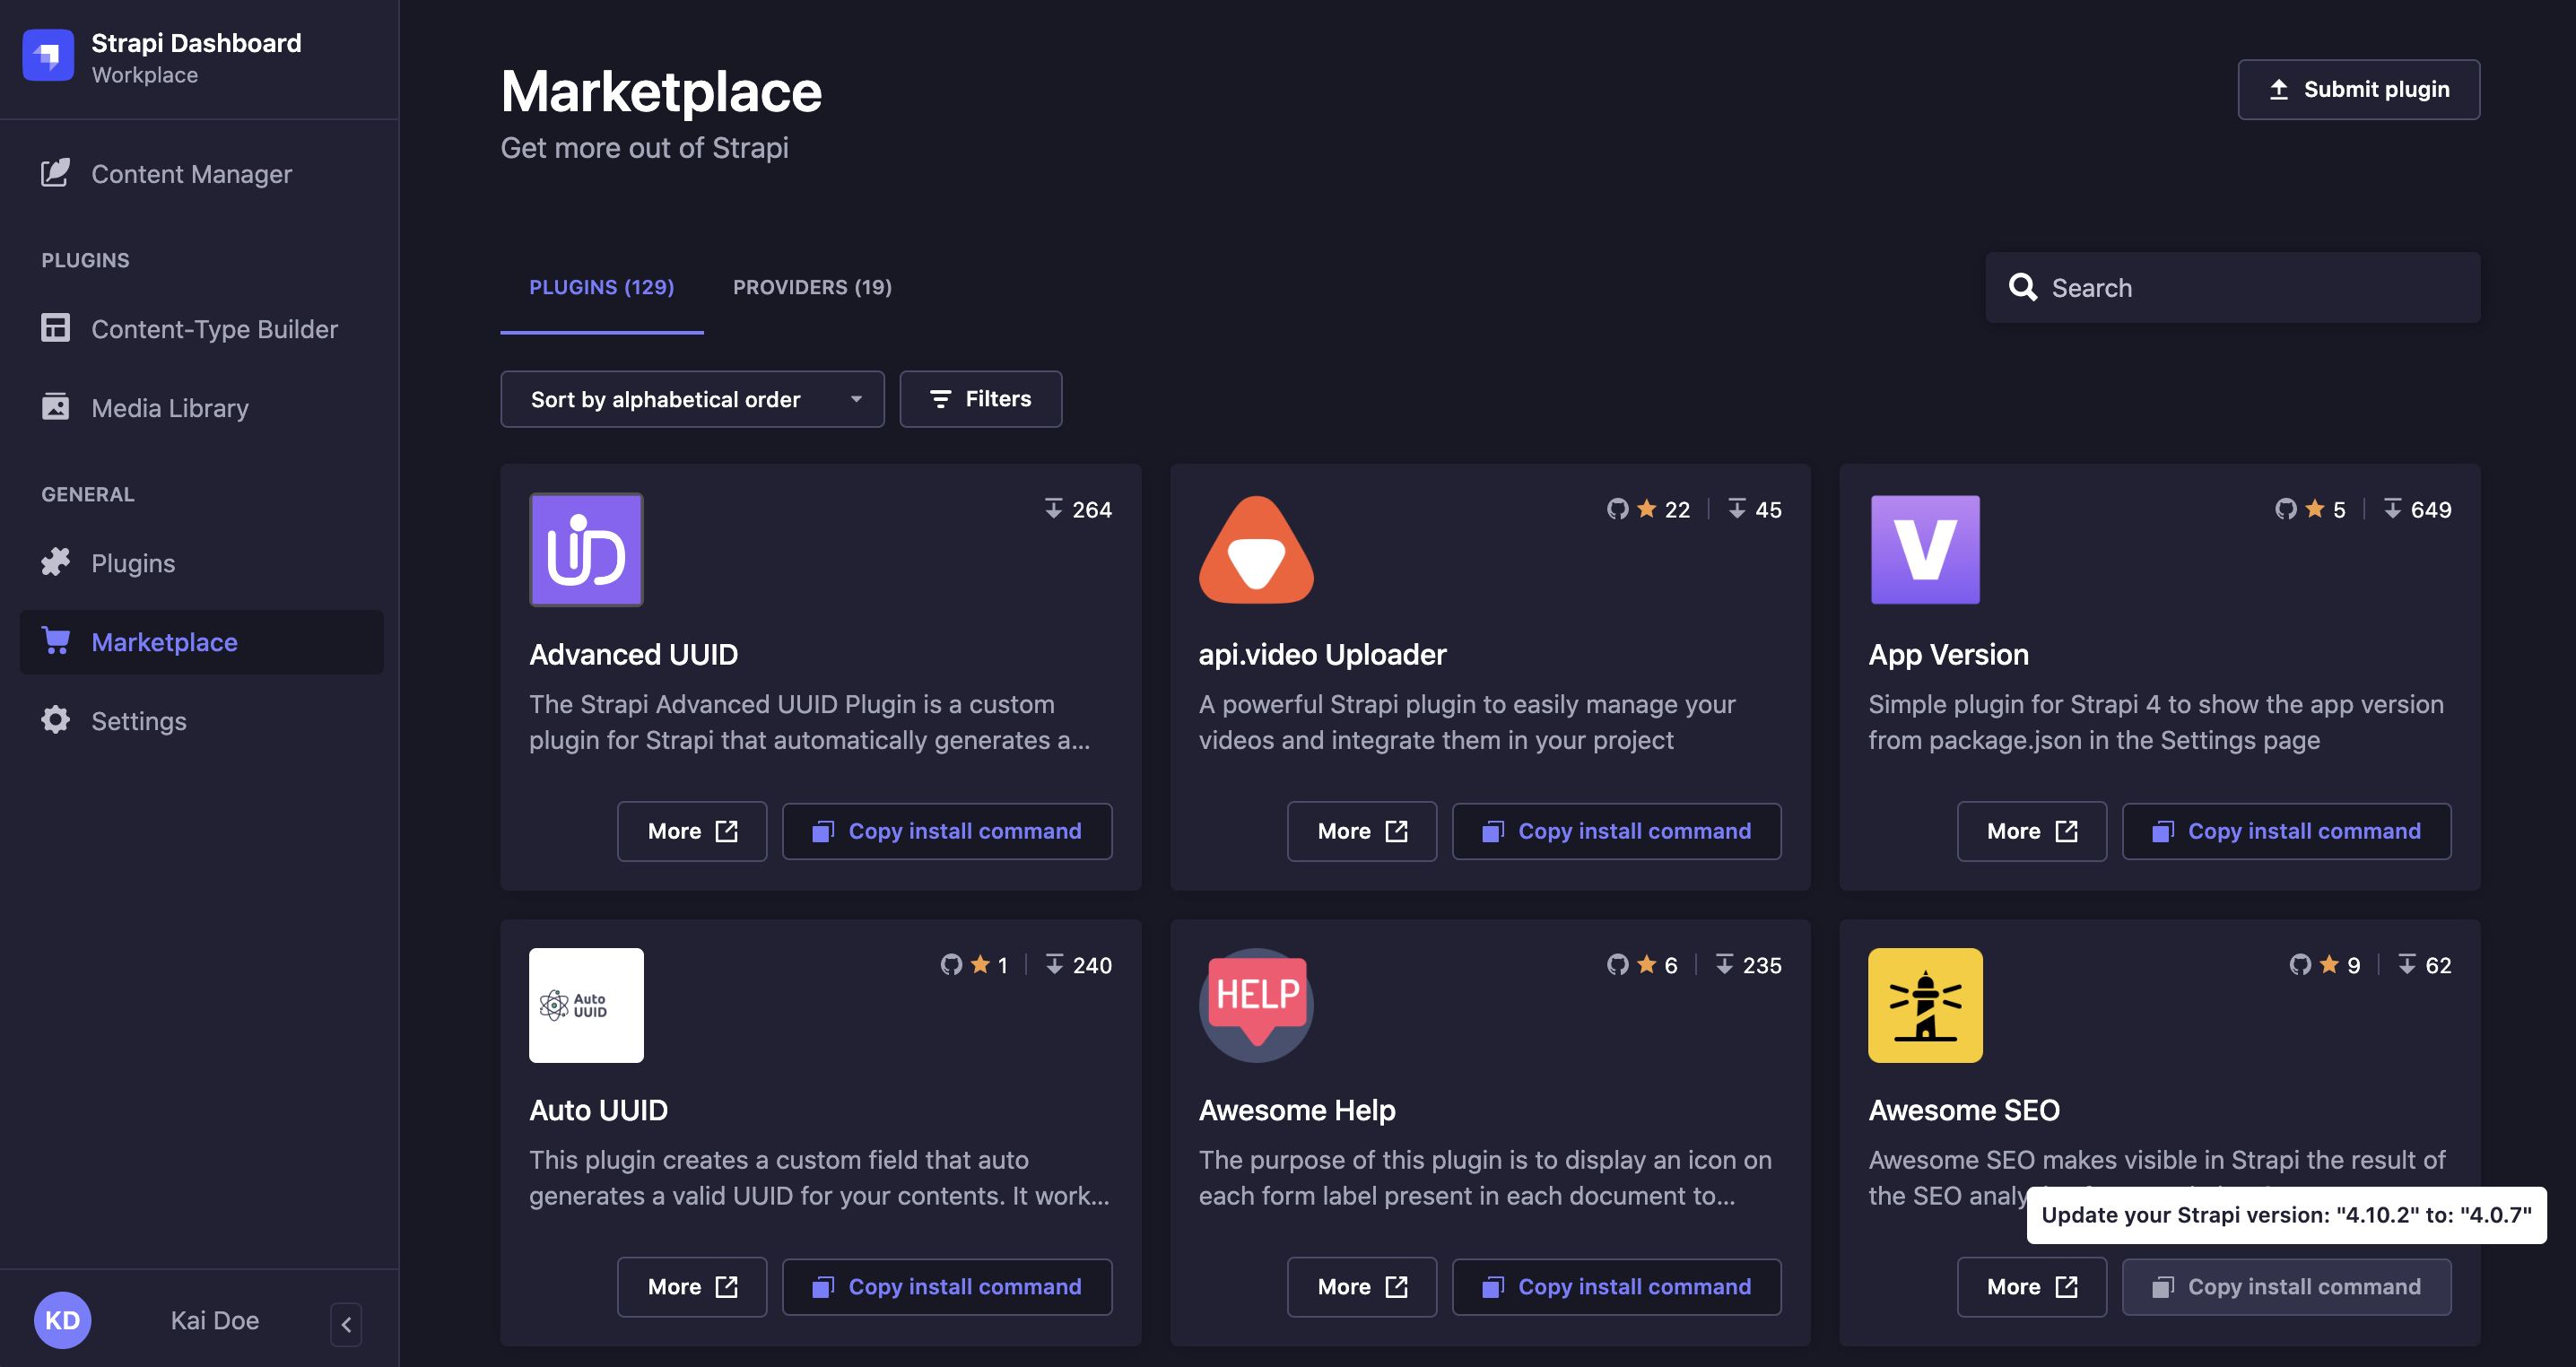 The Marketplace interface